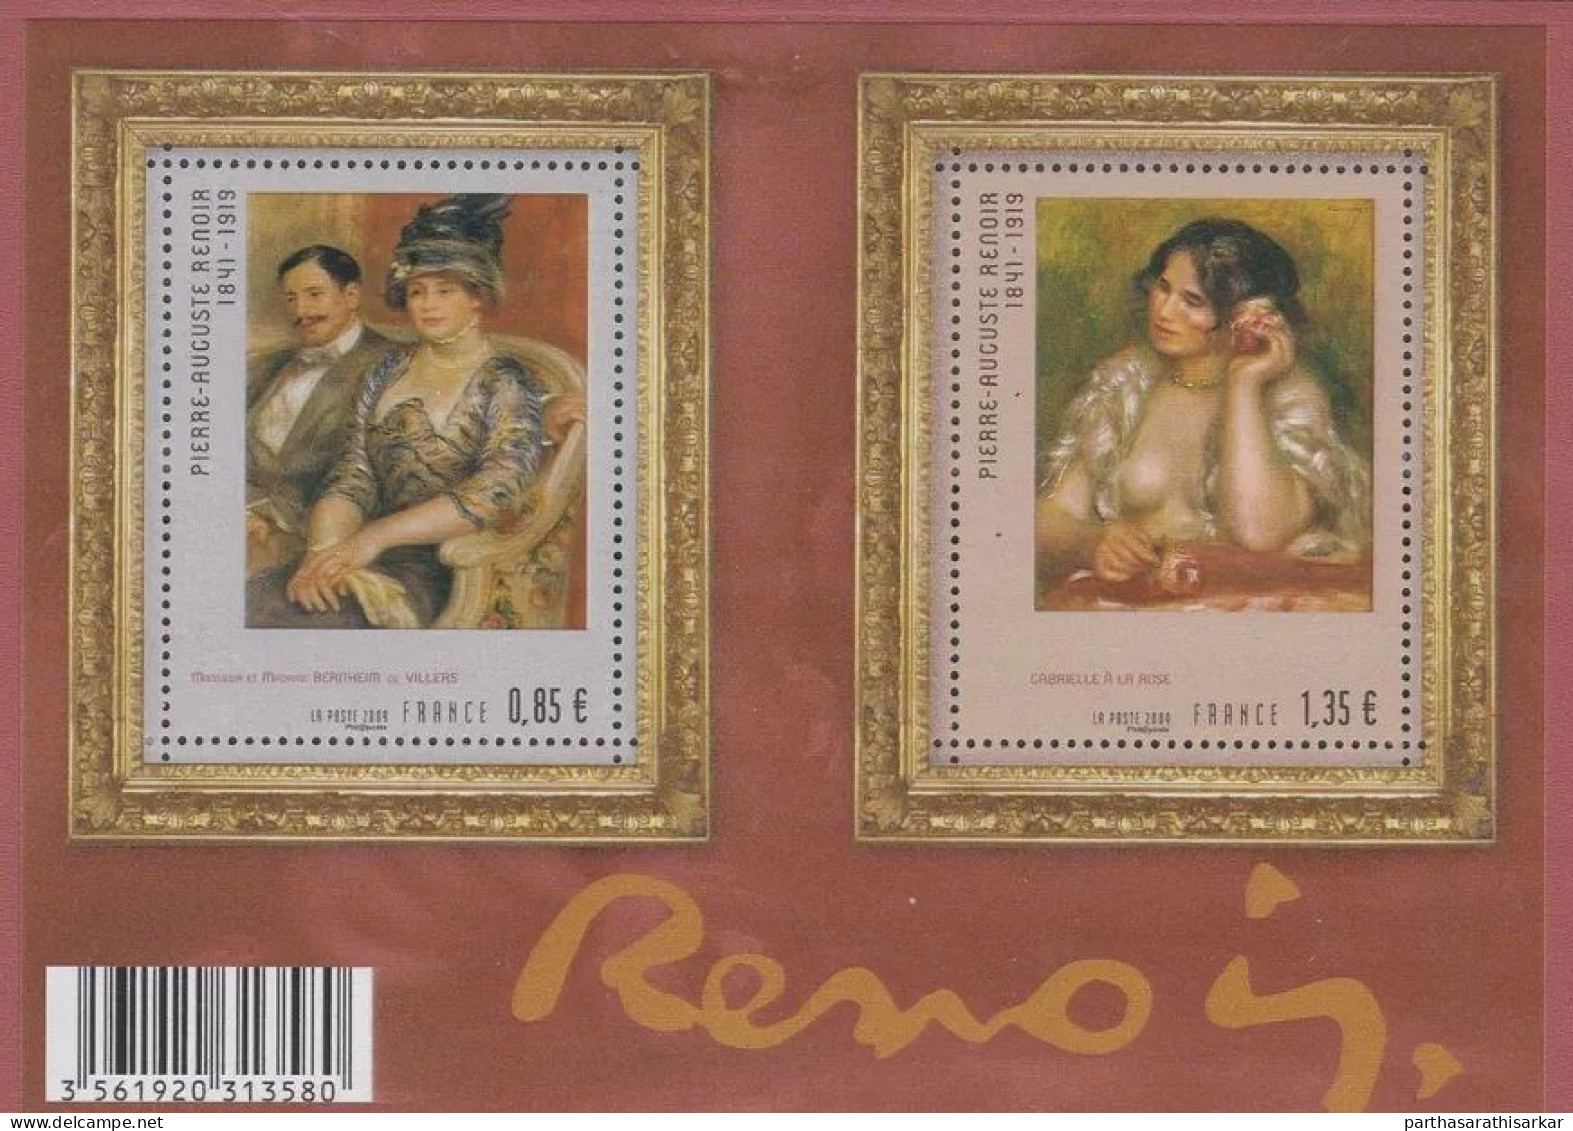 FRANCE 2009 THE 90TH ANNIVERSARY OF THE DEATH OF PIERRE-AUGUSTE RENOIR, 1841-1919 PAINTINGS MINIATURE SHEET MS MNH - Ongebruikt